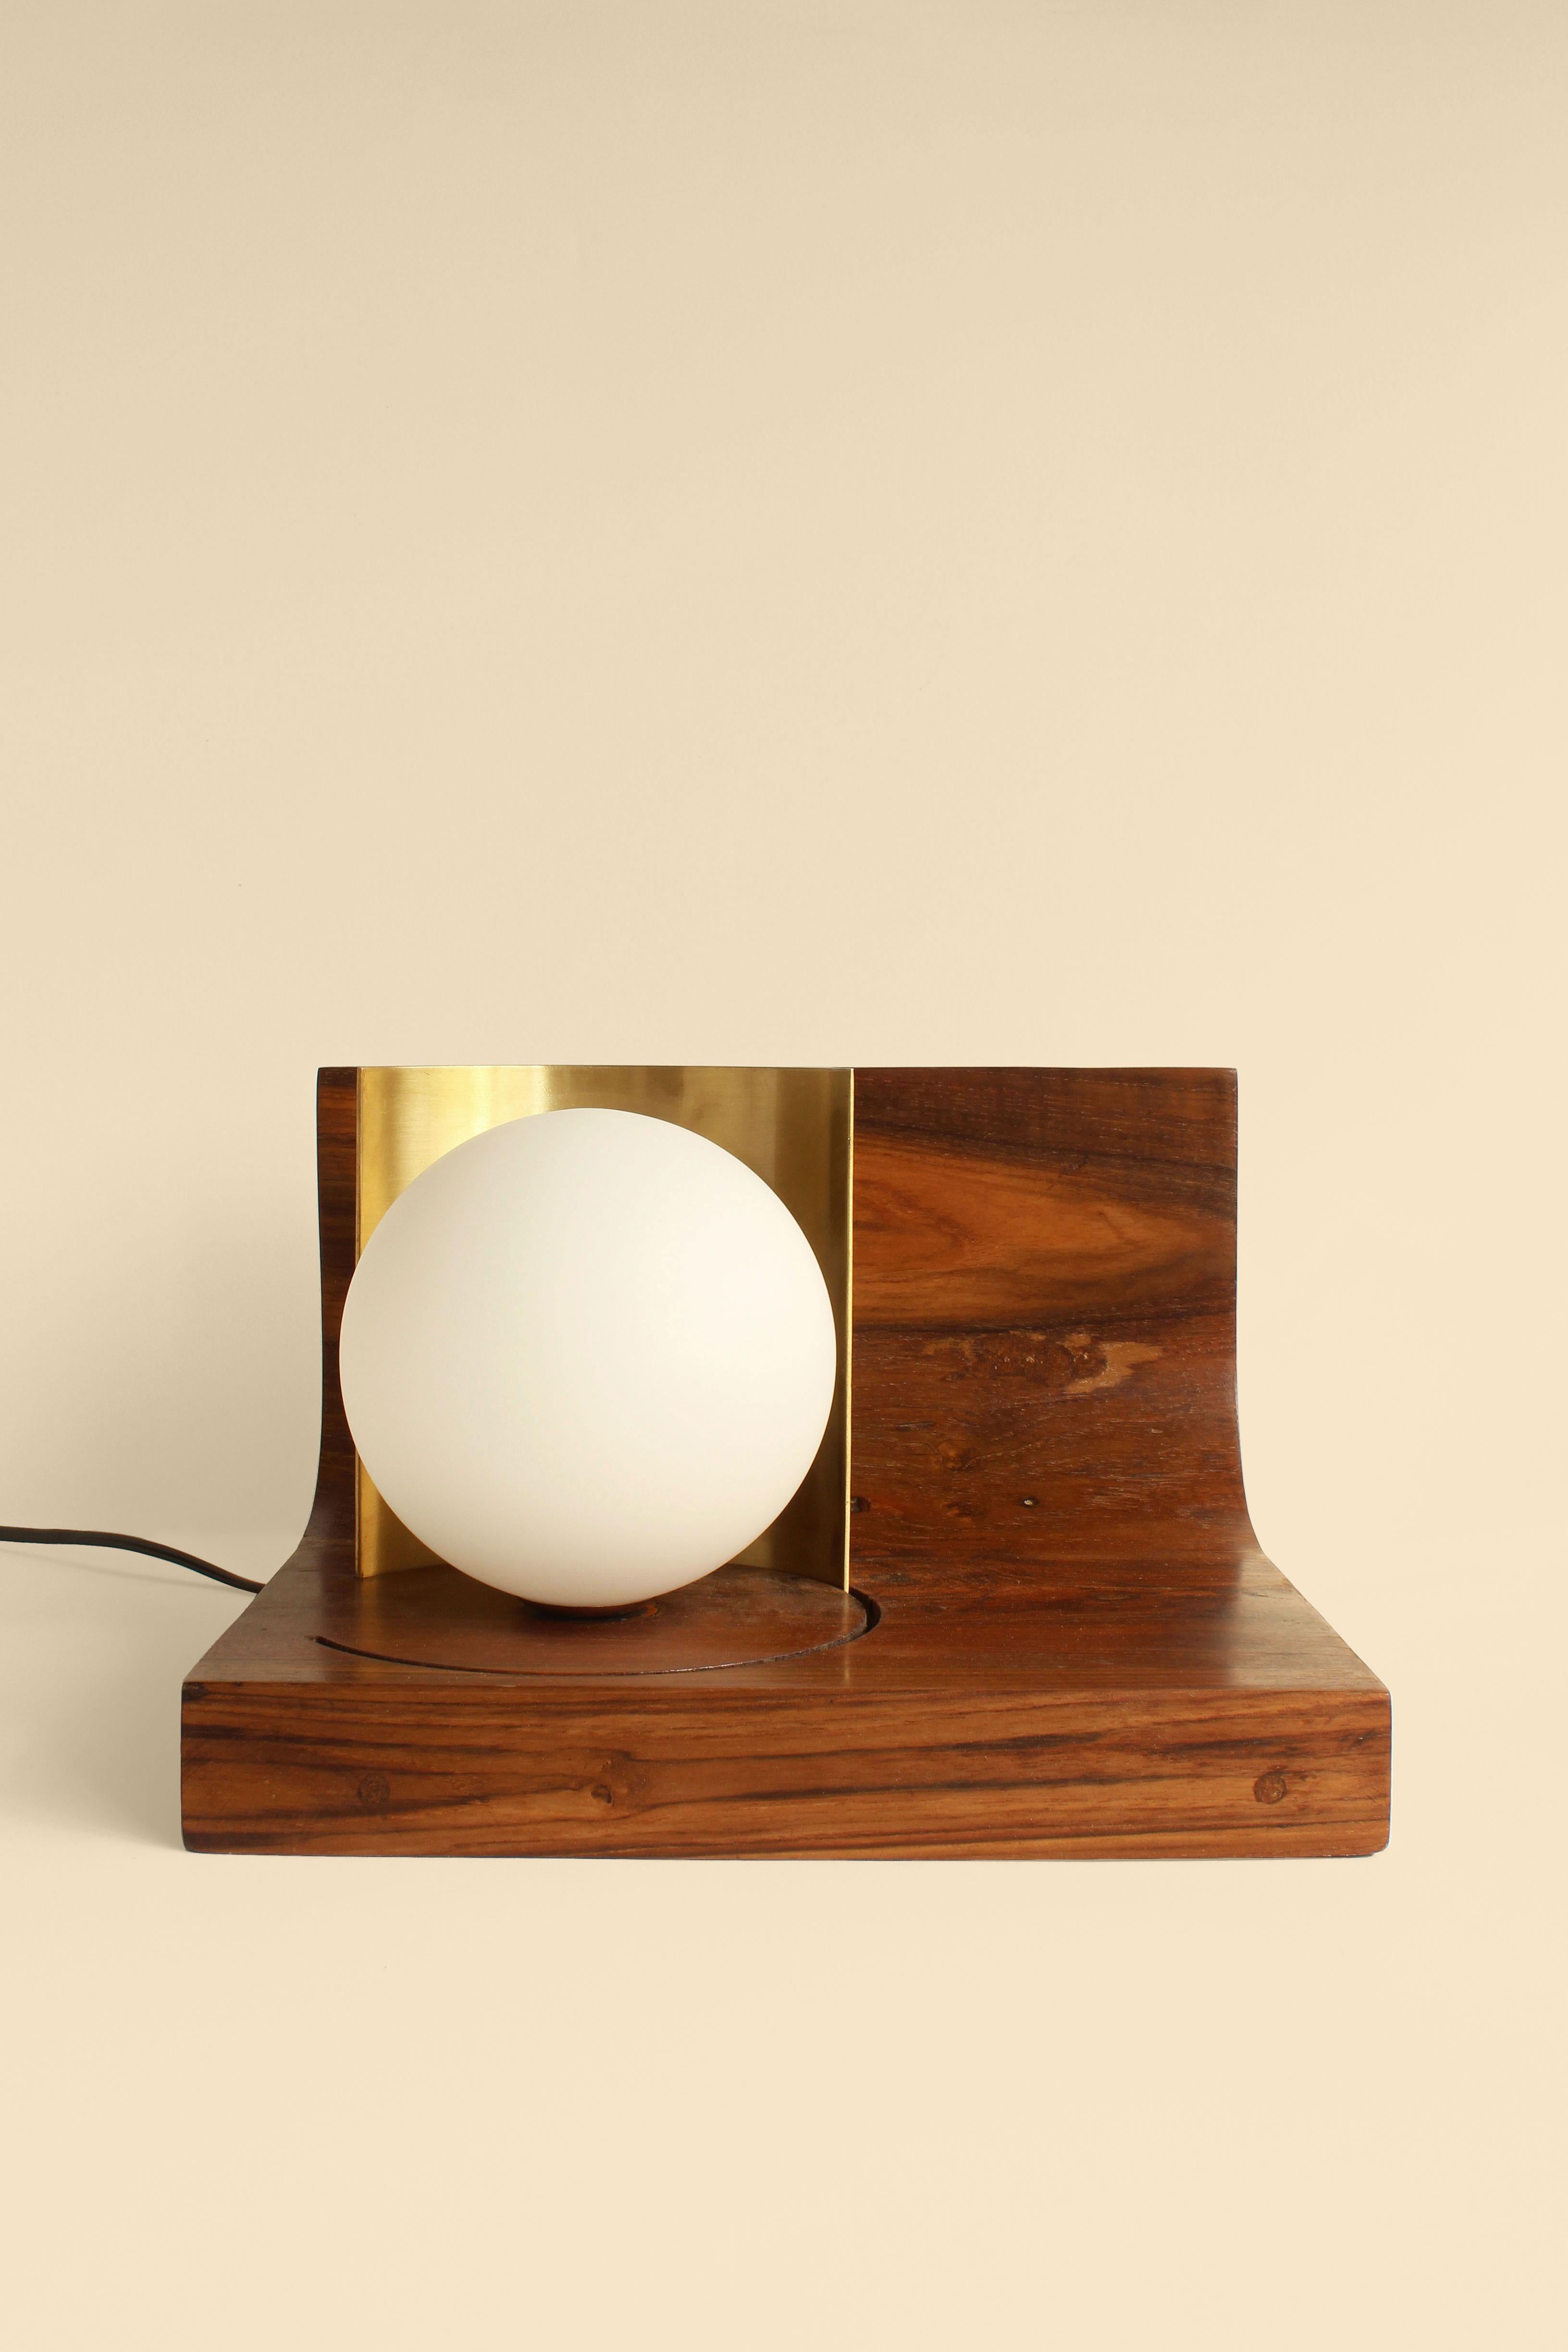 Indu Table Lamp by Studio Indigene
Dimensions: D 26.67 x W 24.13 x H 16.51 cm
Materials: Reclaimed Teak Wood, Brass, Glass Globe. 
Colors Brown, Natural Wooden Finish.

Indu, waxing and waning; goes from a table lamp to a night lamp, the moving